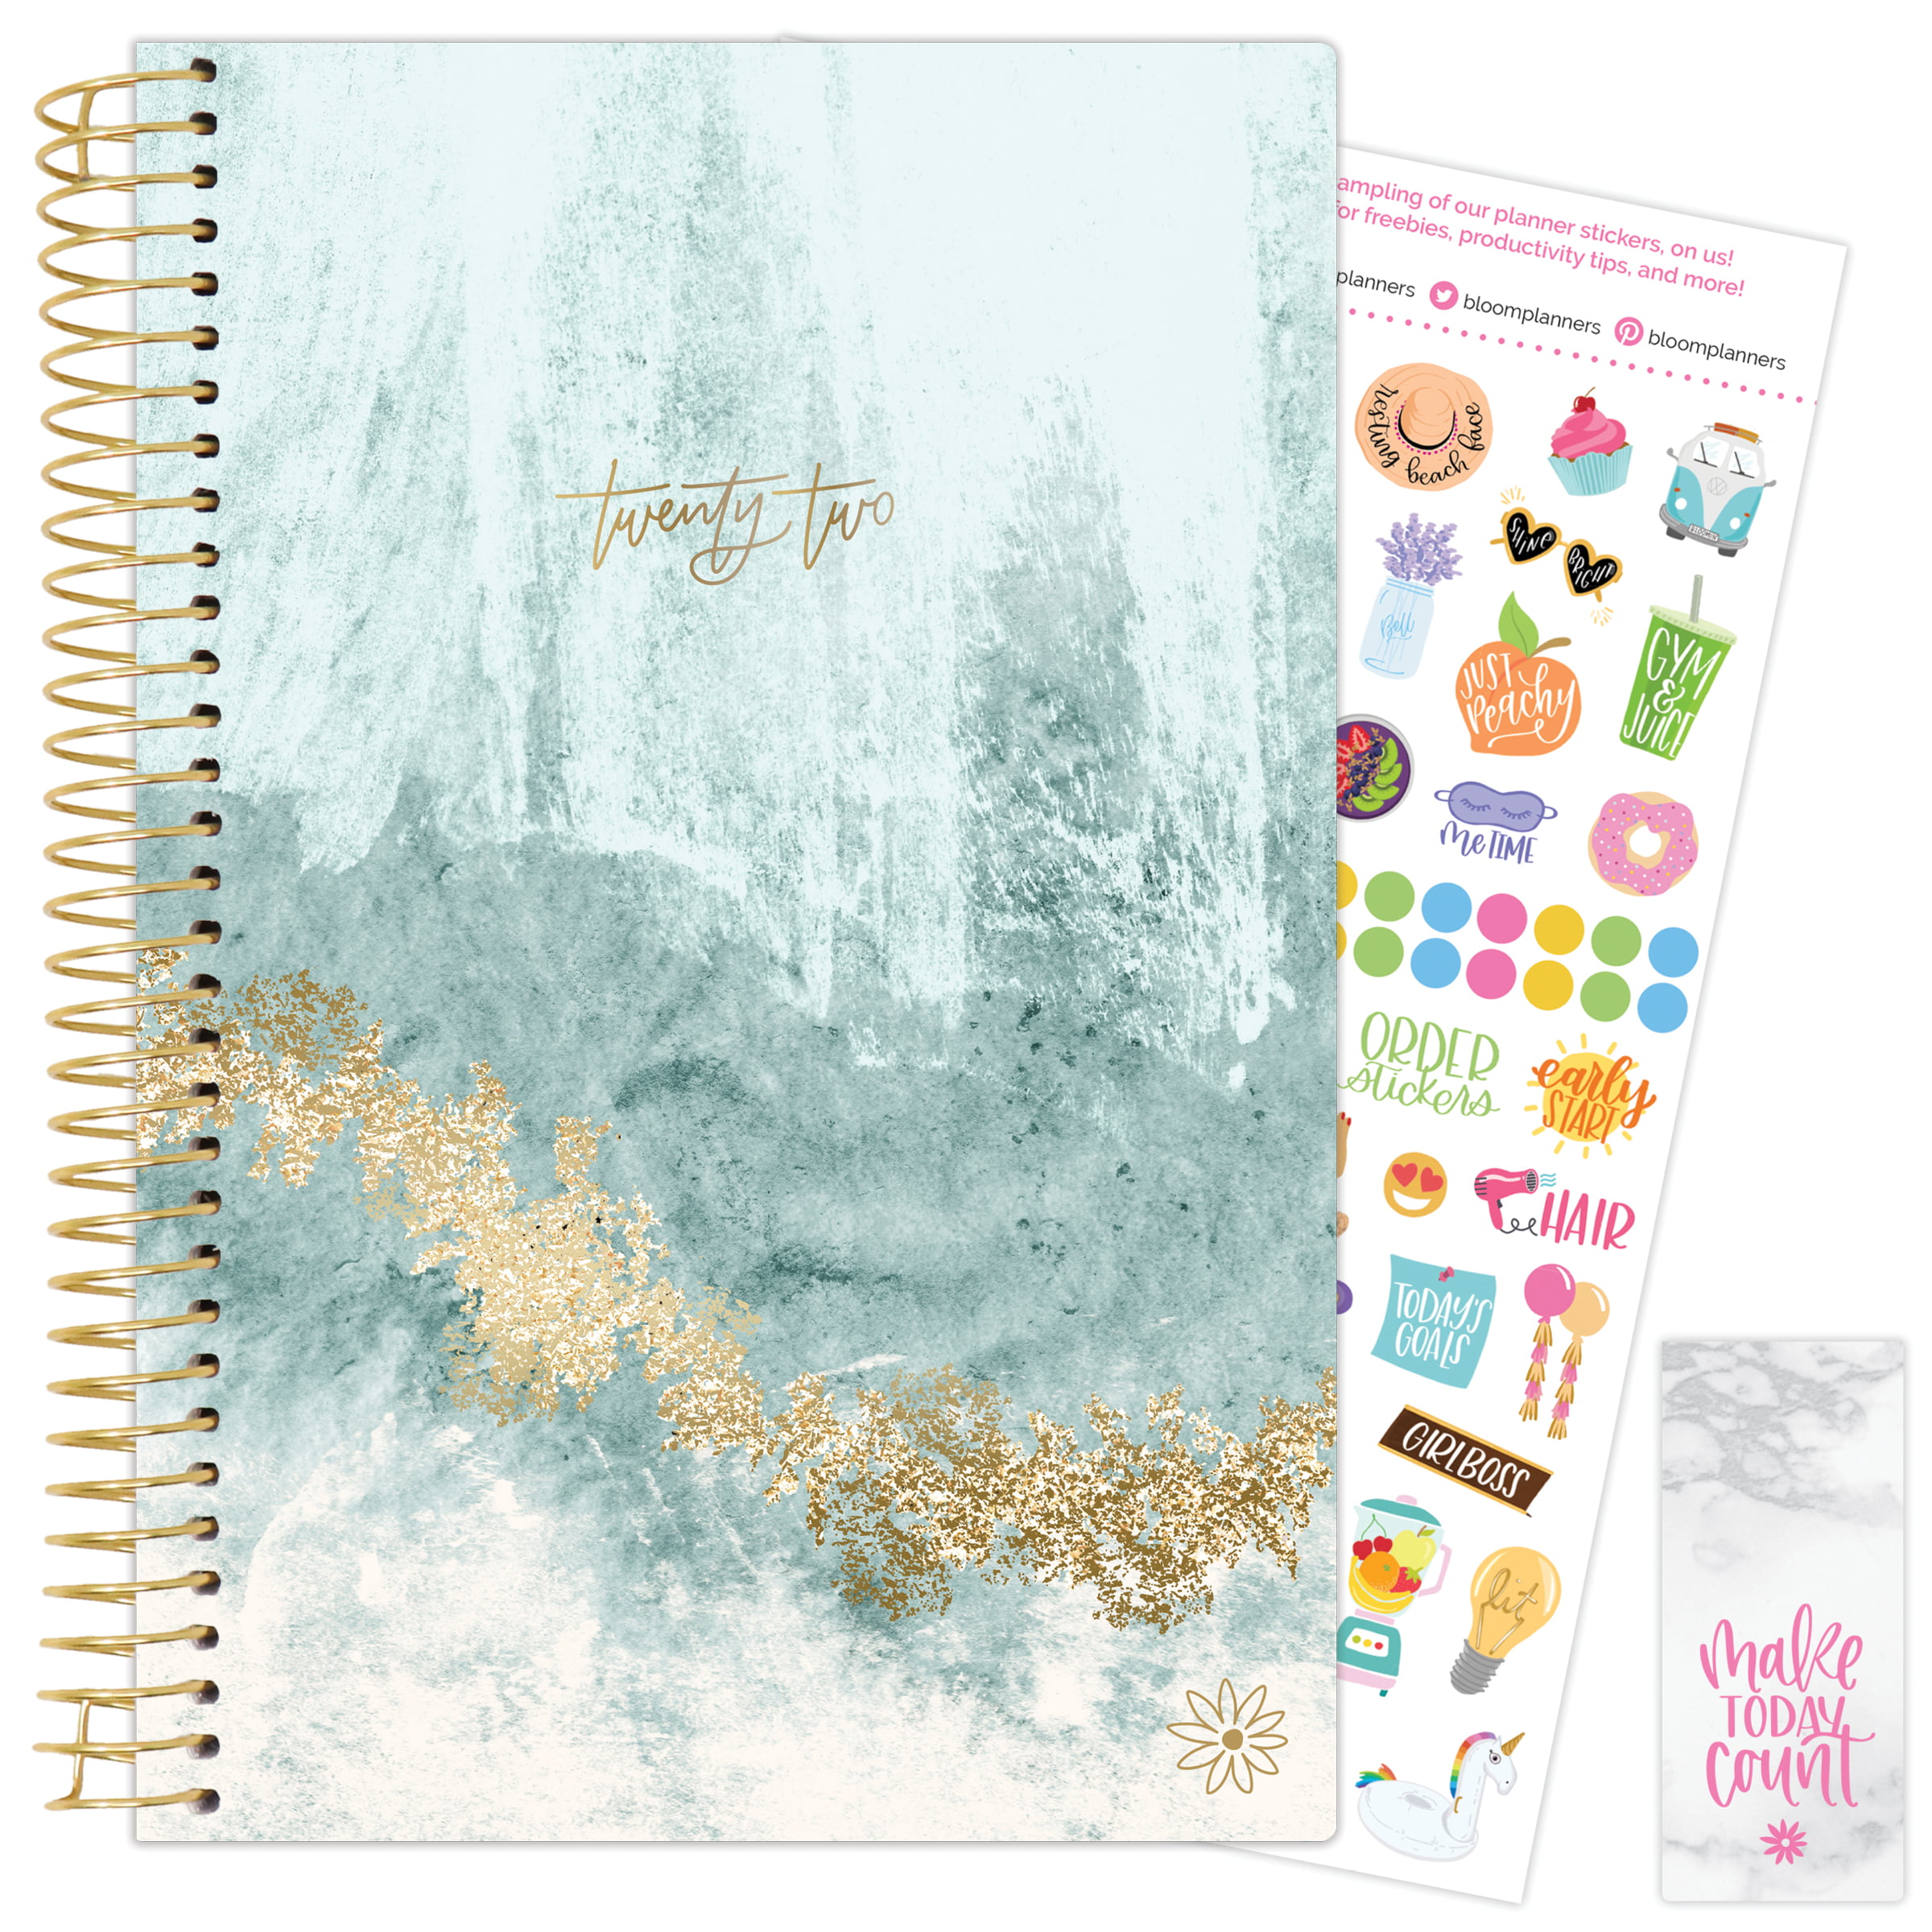 2022 Calendar Year Jan-Dec Be Kind by bloom daily planners 8.5x11 SOFT COVER PLANNER